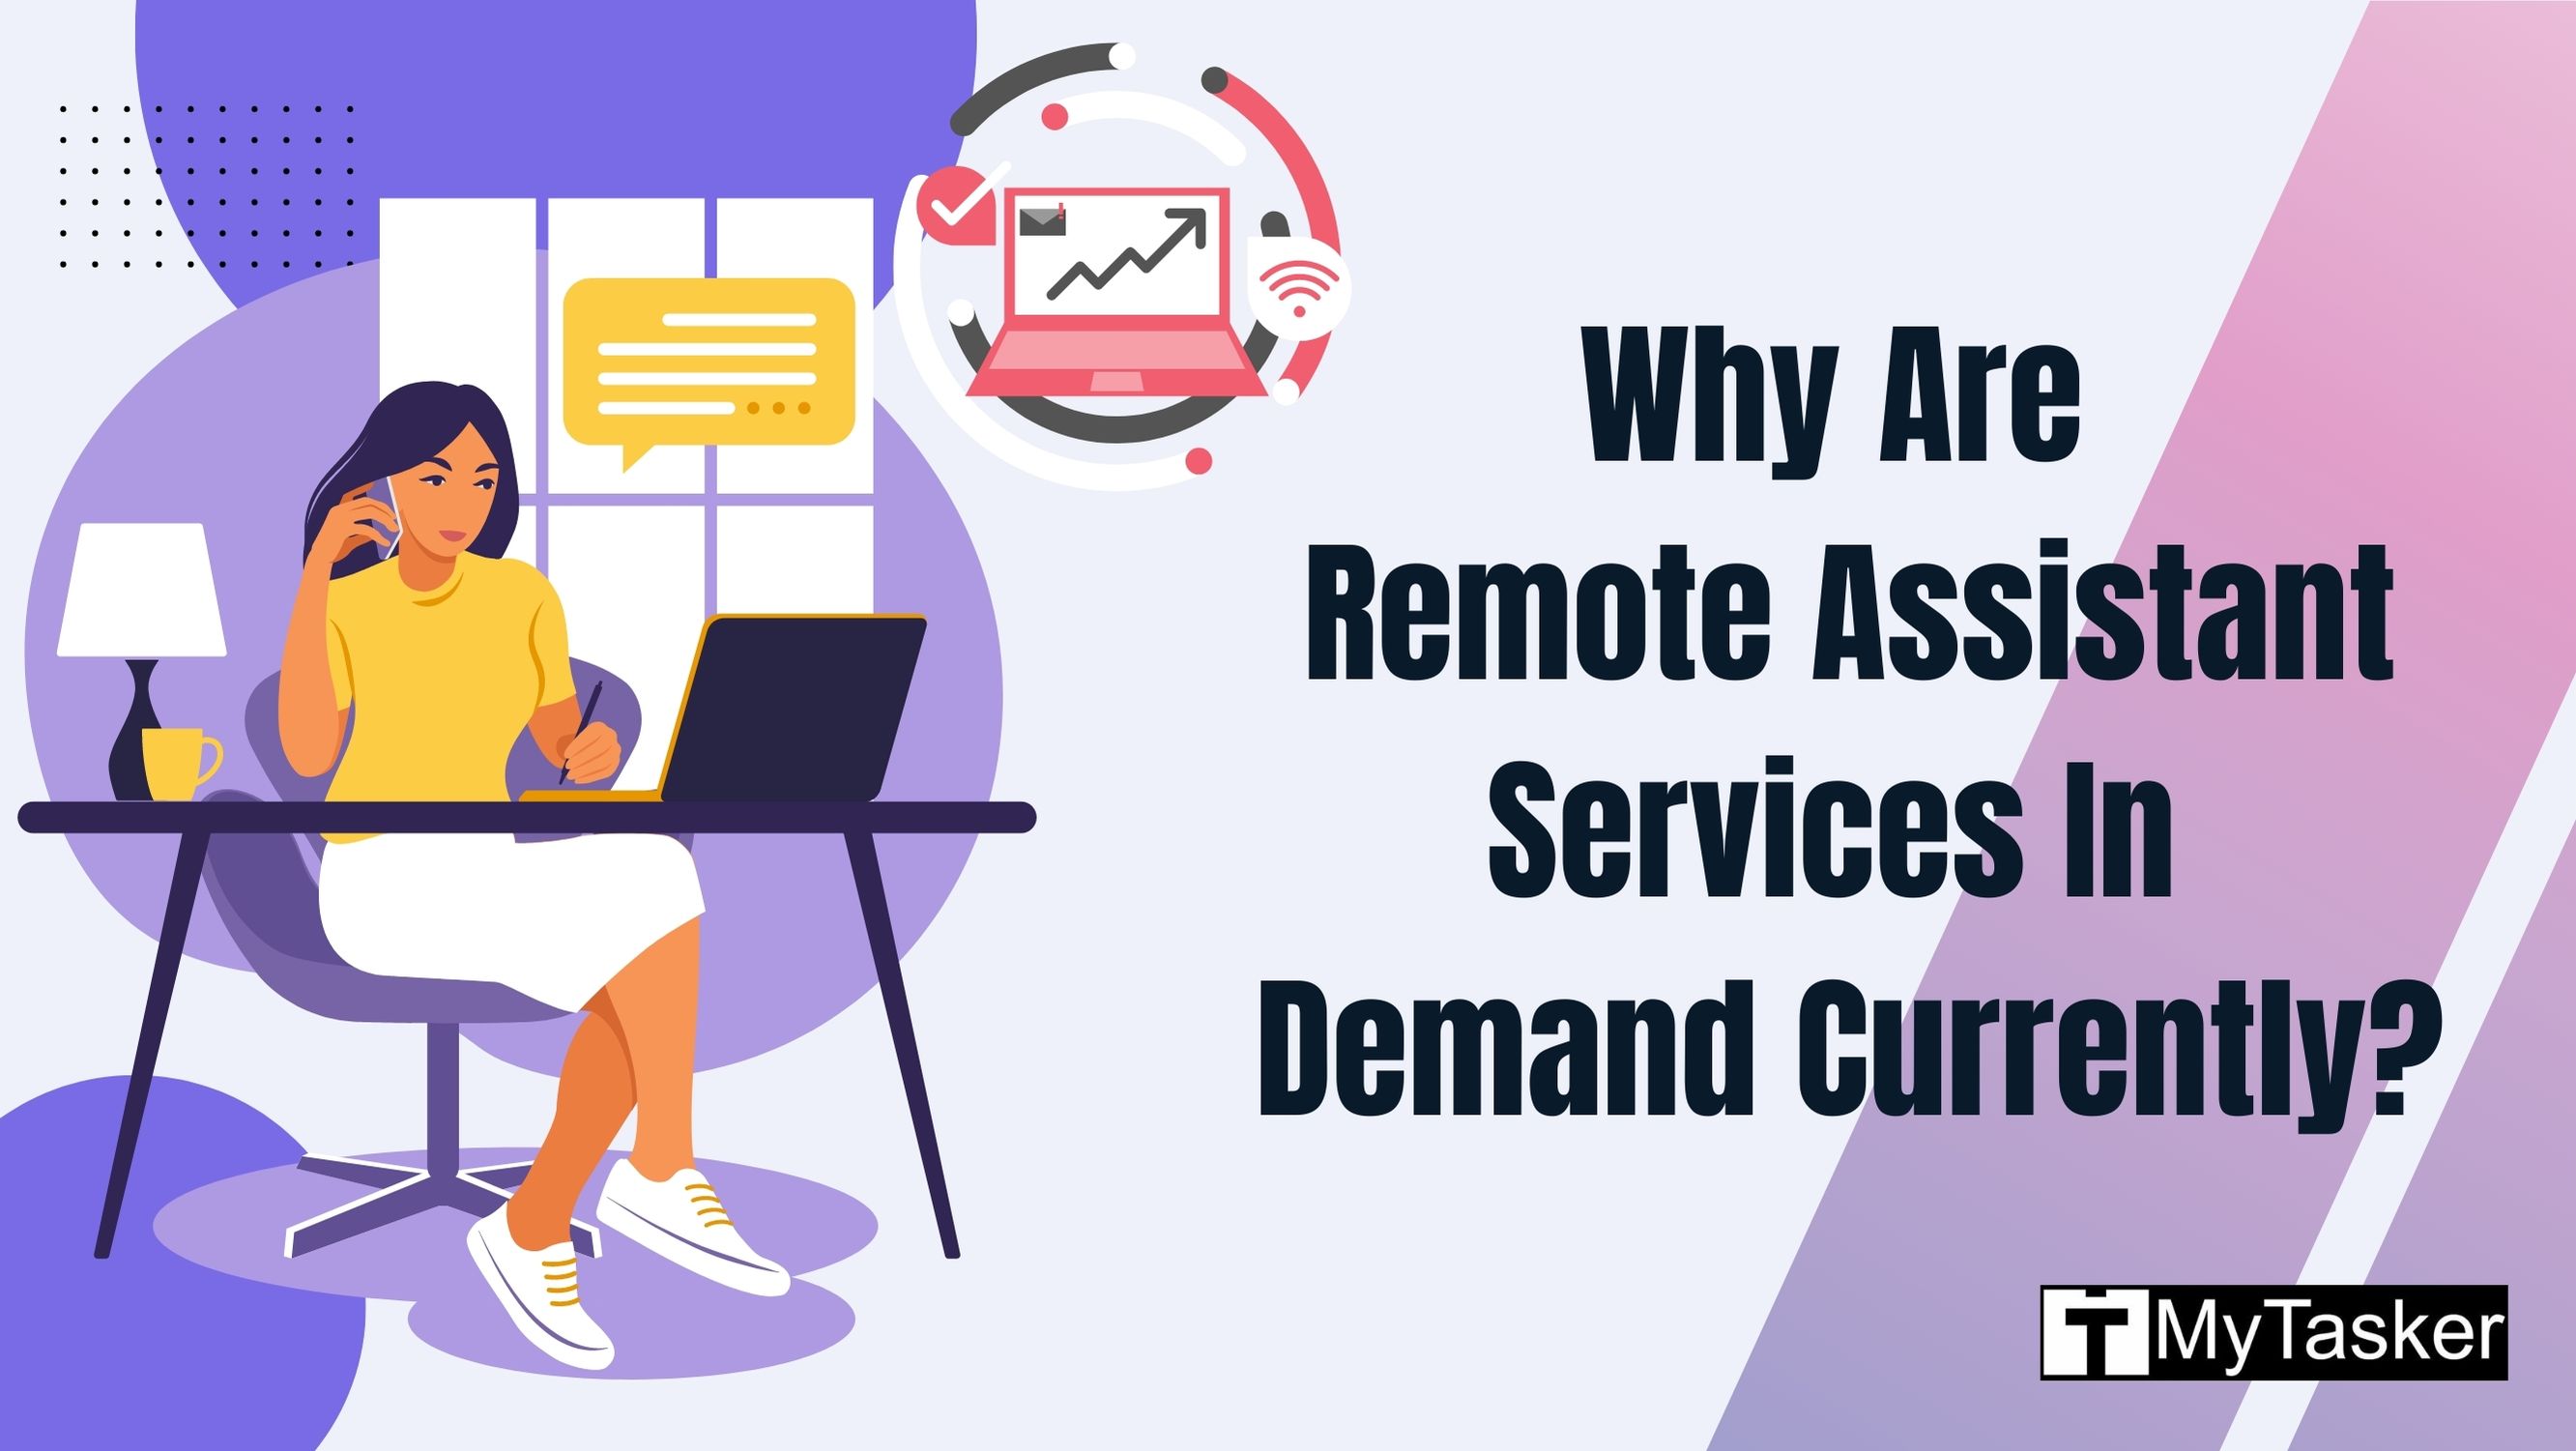 Why are remote assistant services in demand currently?